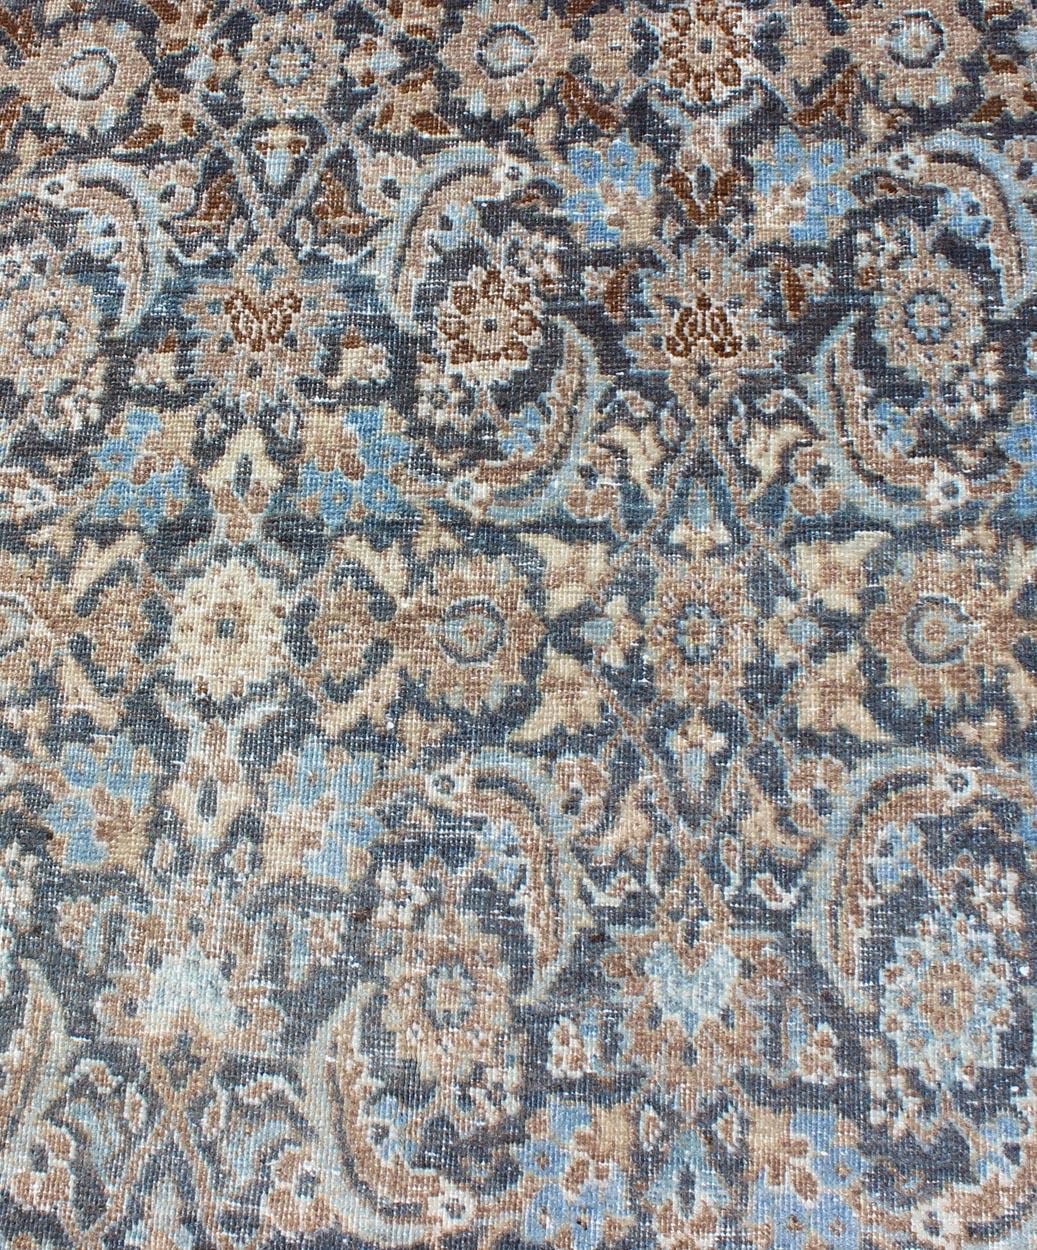 Wool Vintage Persian Tabriz Runner with Ornate Floral Design in Blue and Taupe For Sale